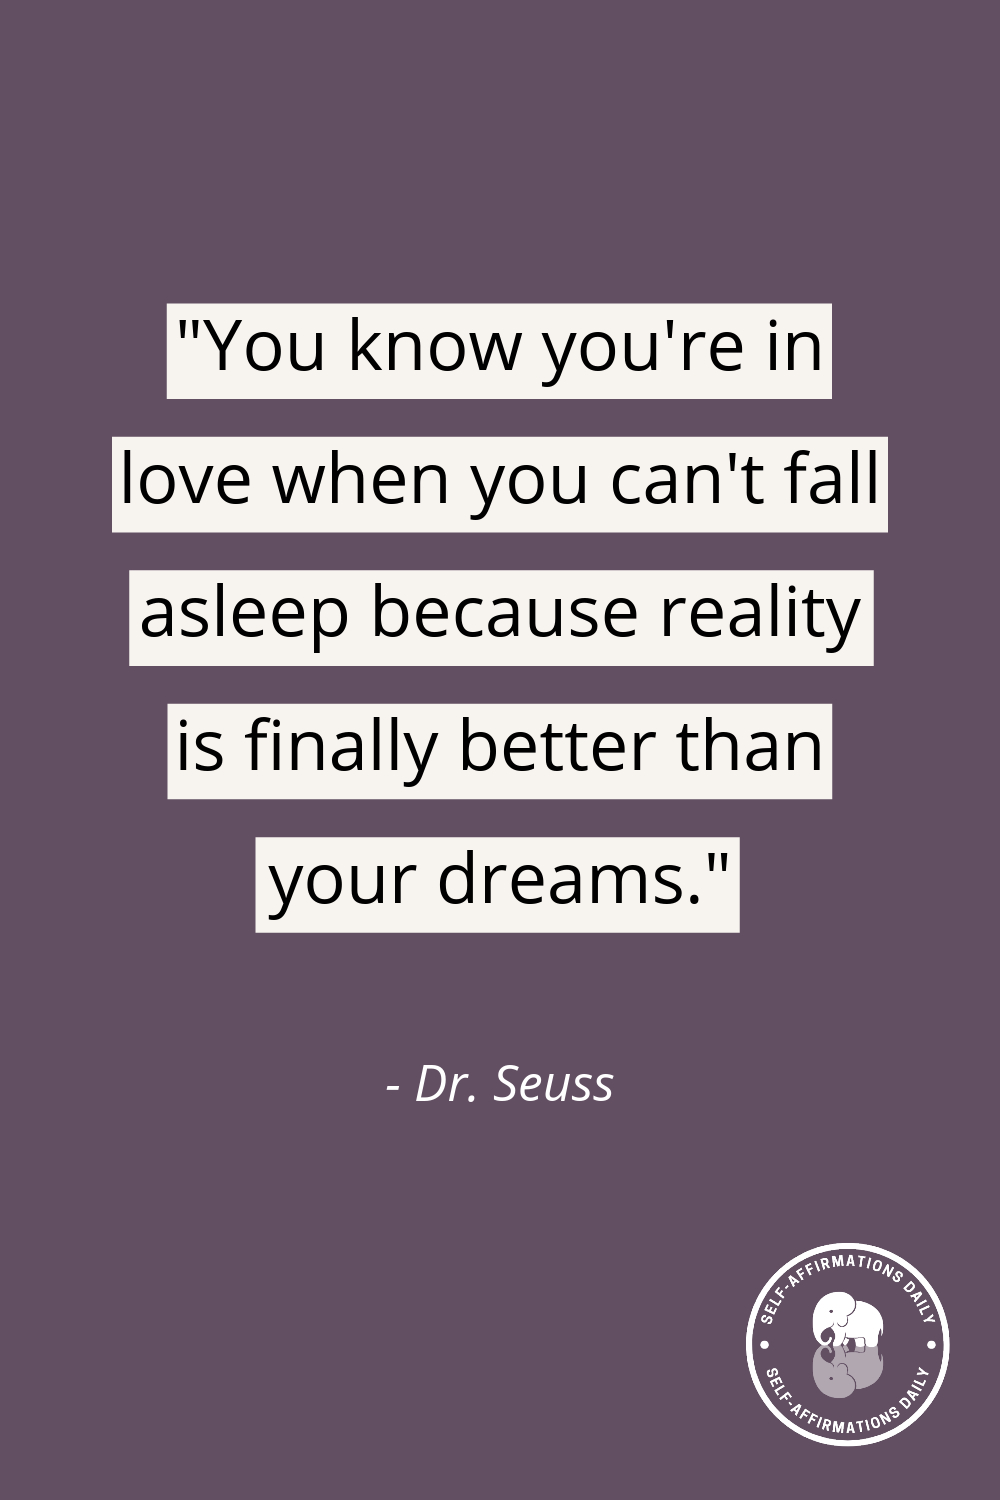 110 Good Night Quotes for a Restful Sleep - Self Affirmations Daily